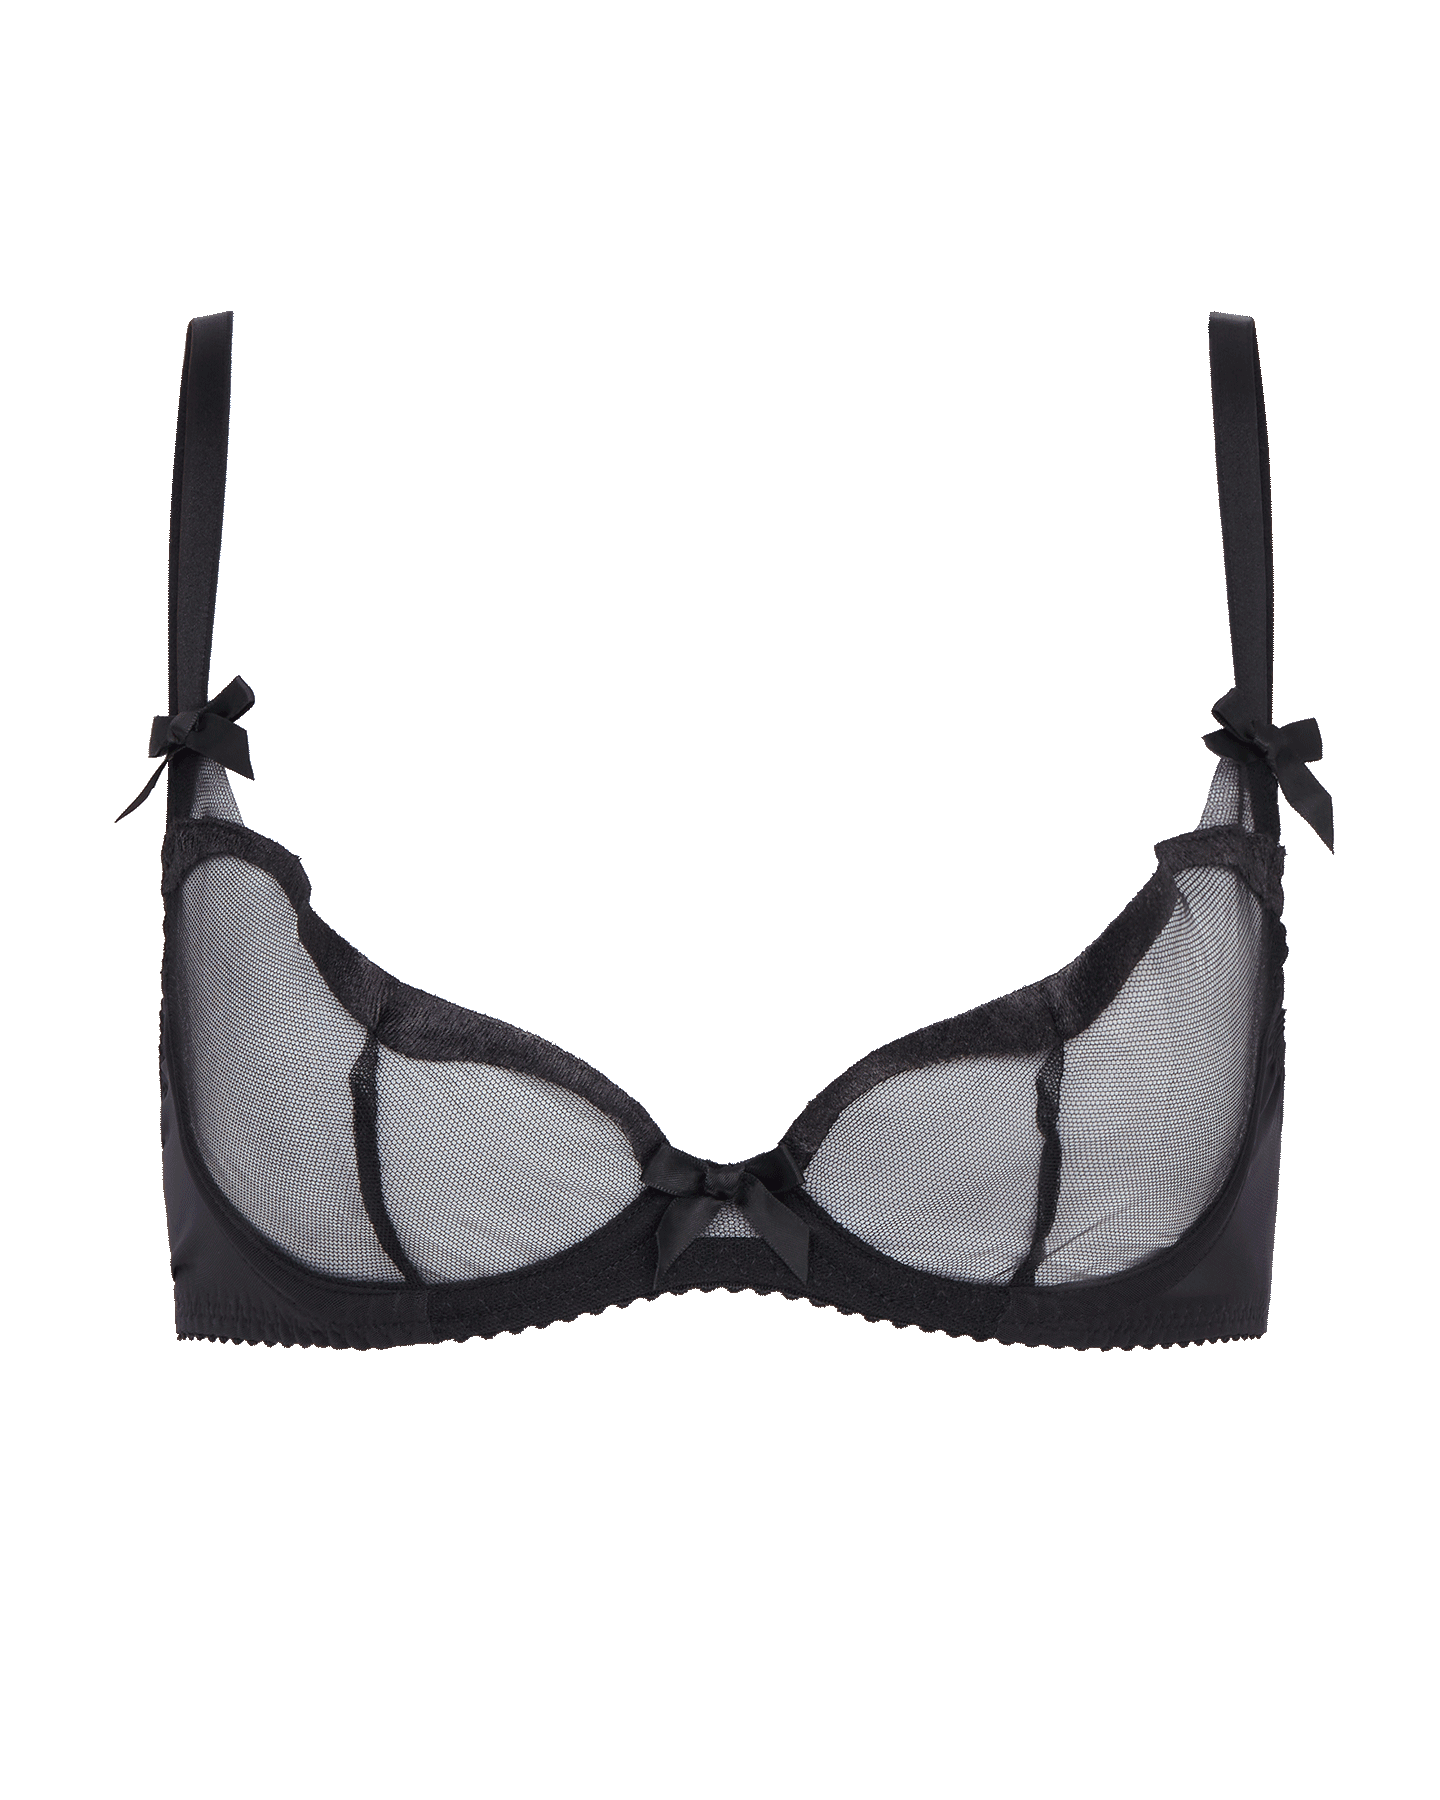 Agent Provocateur, Edwina Satin-trimmed Embroidered Lace Underwired Plunge  Bra, Black, 32A,34A,32B,34B,36B,32C,34C,36C,38C,32D,34D,36D,38D,32DD,34DD,36DD,38DD,32E,34E,36E,32F, 34F